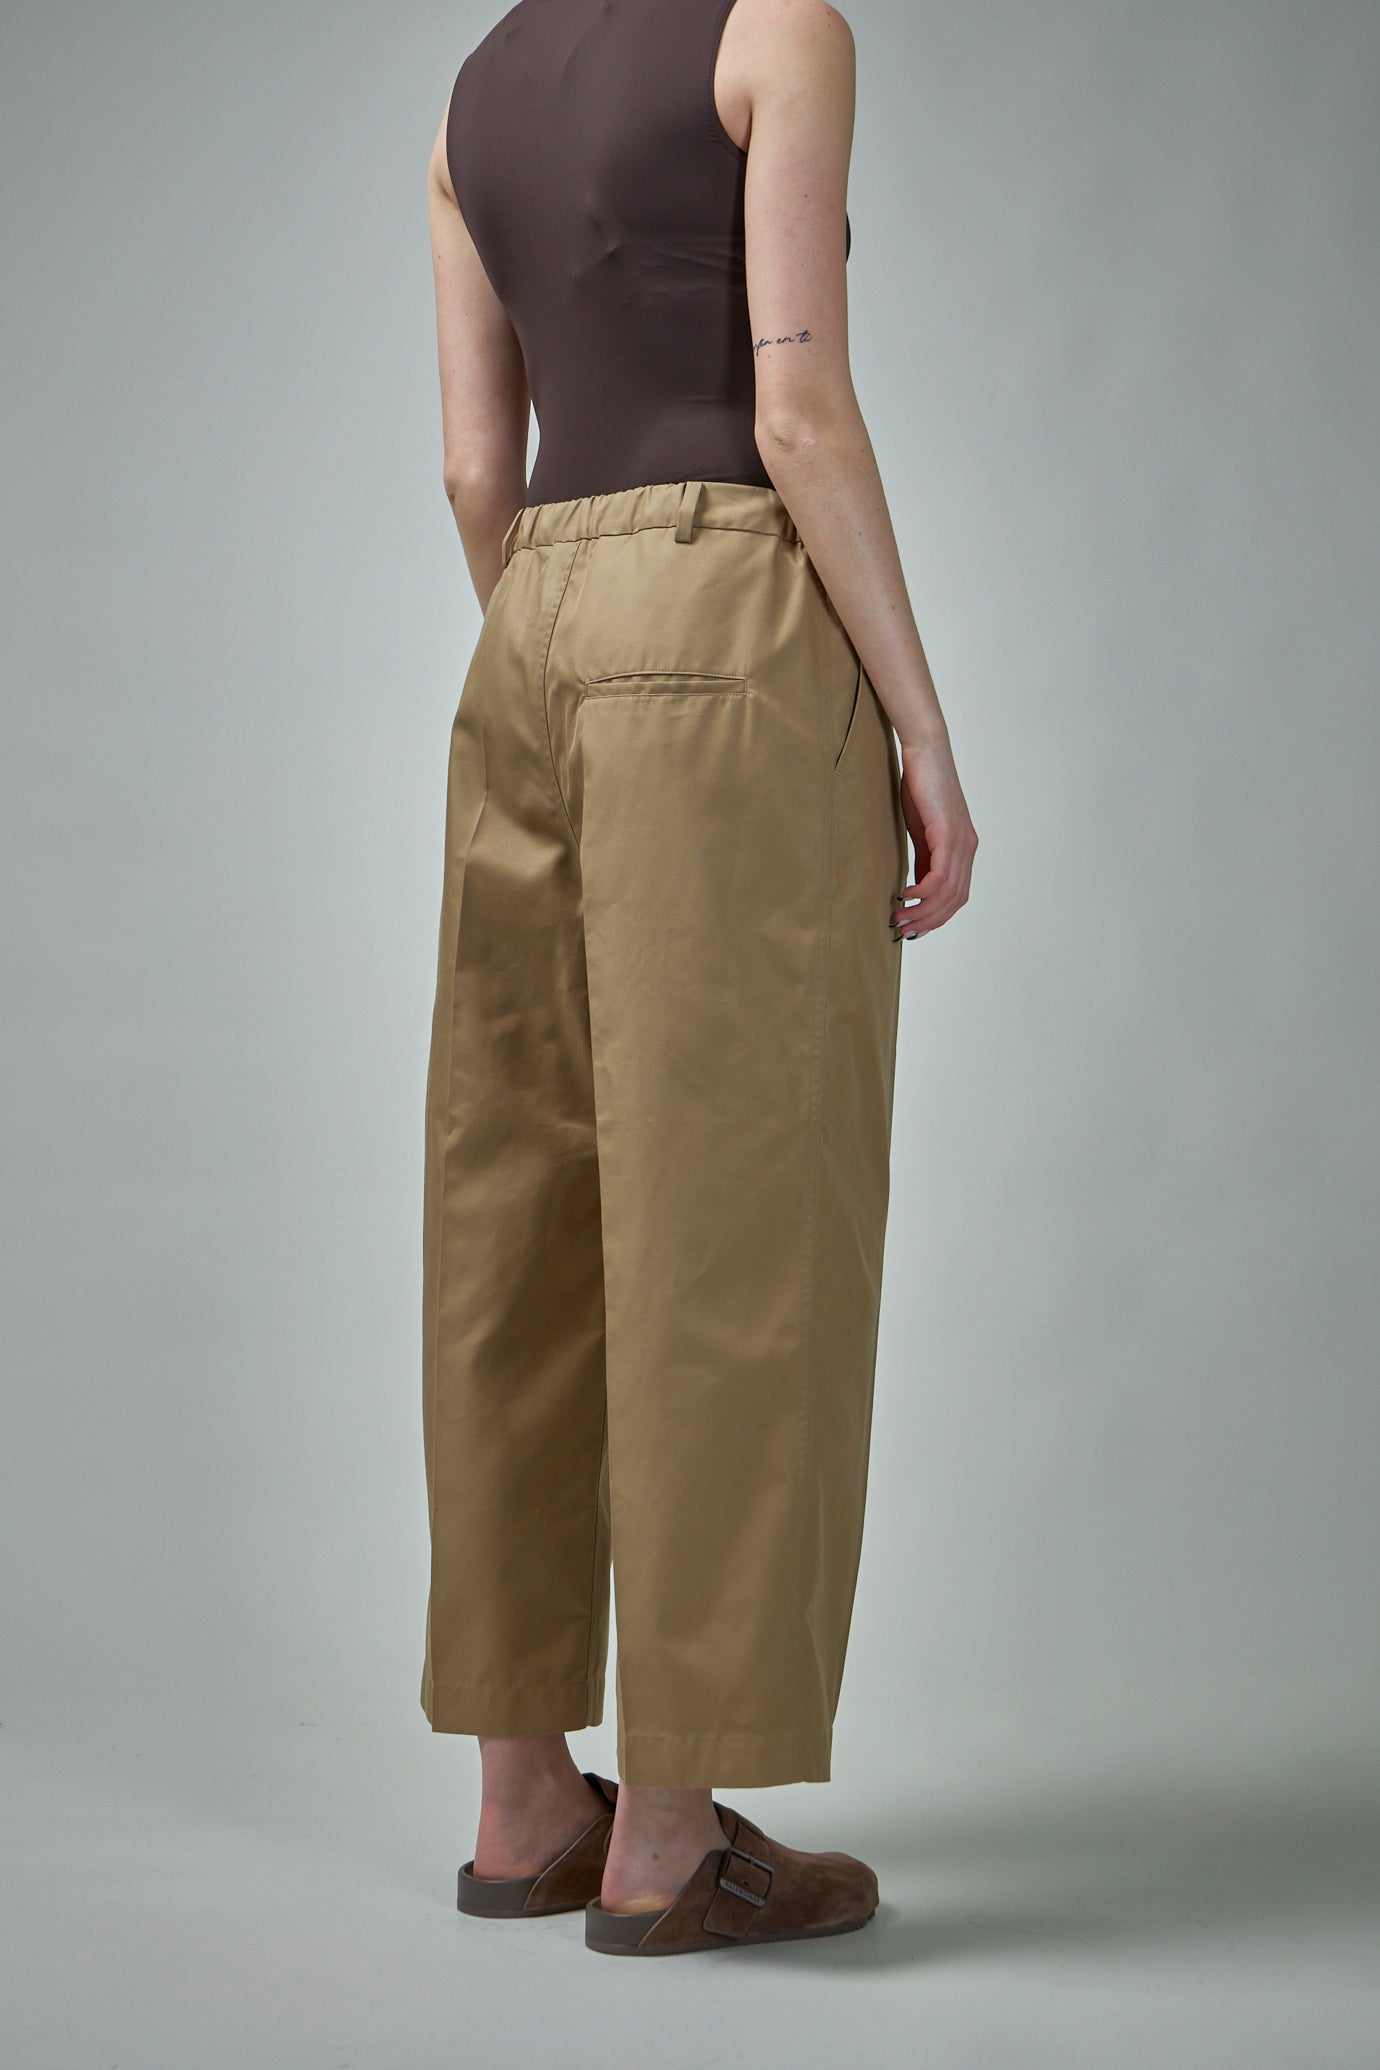 Darted Pants With Elastic Waistband Woven